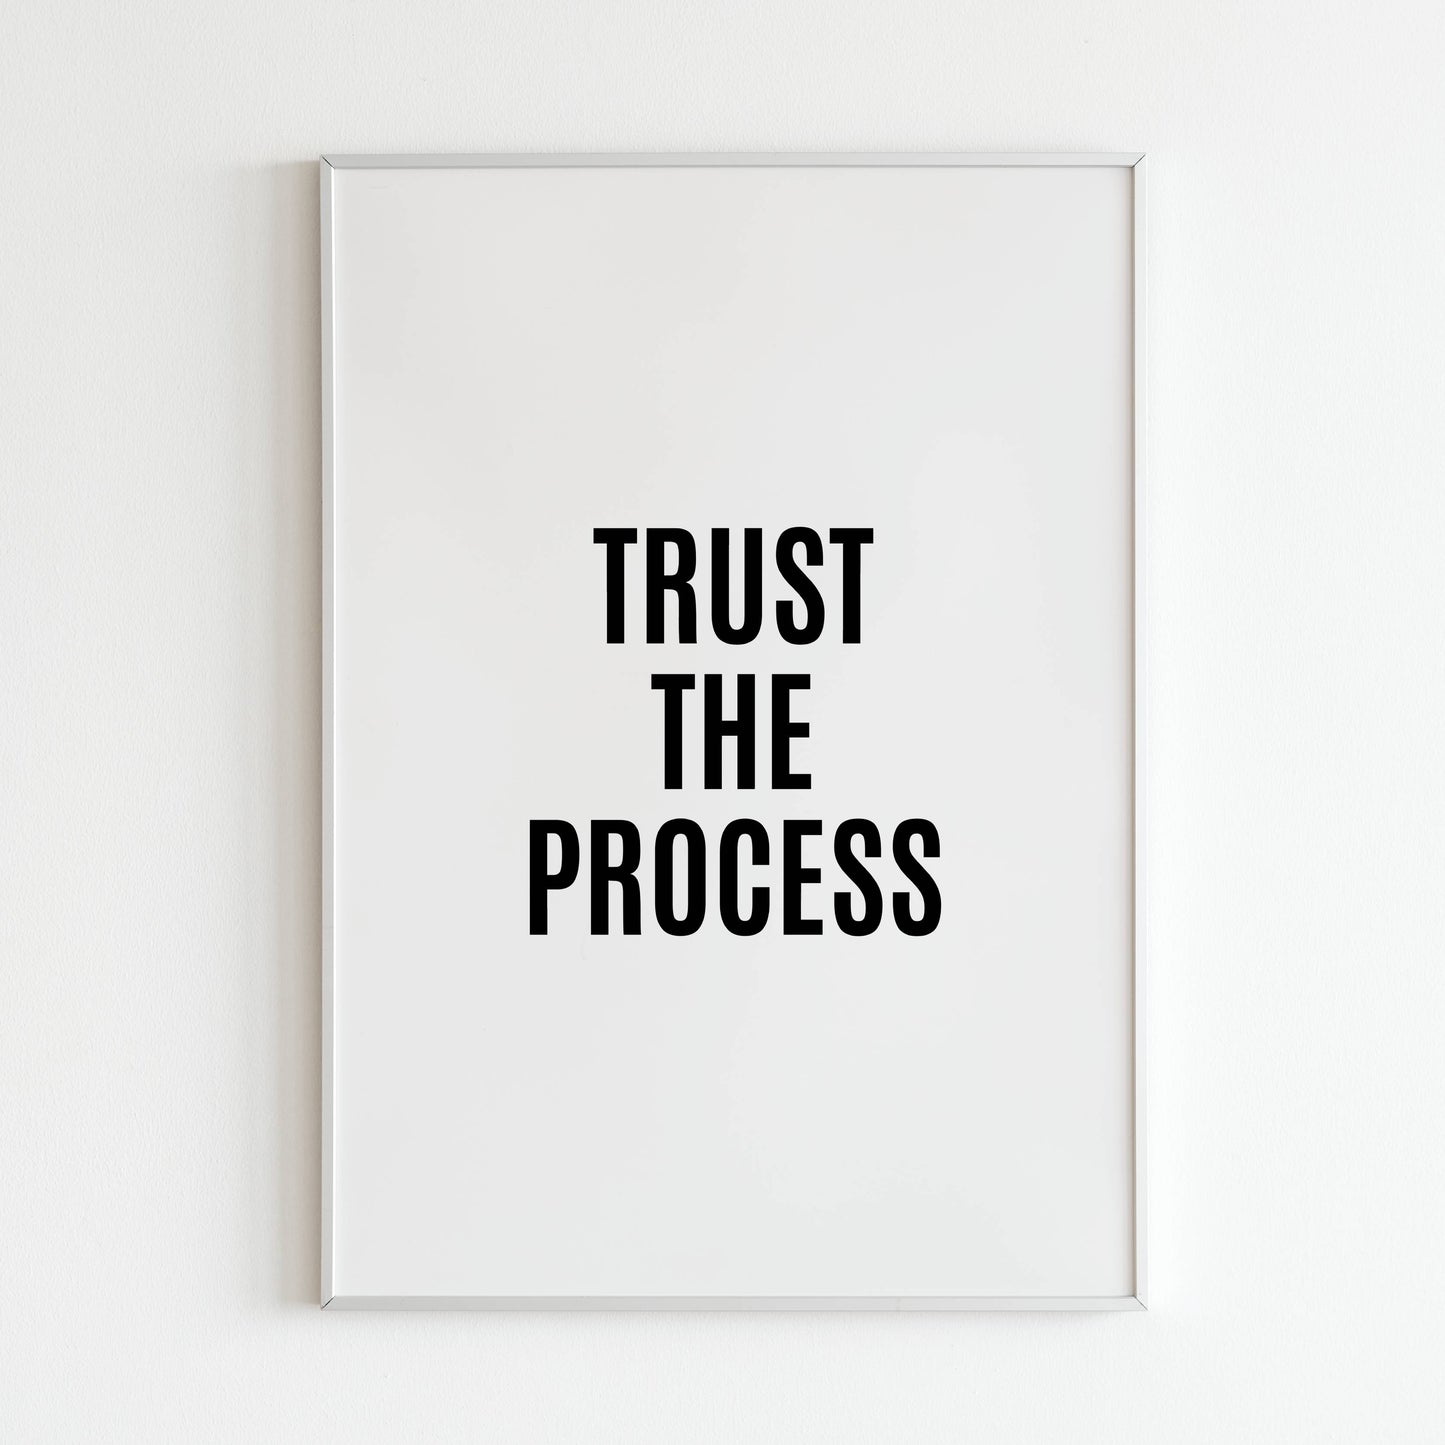 Trust the process - Printed Wall Art / Poster. This beautiful poster adds a touch of sophistication to your space. Arrives ready to hang.